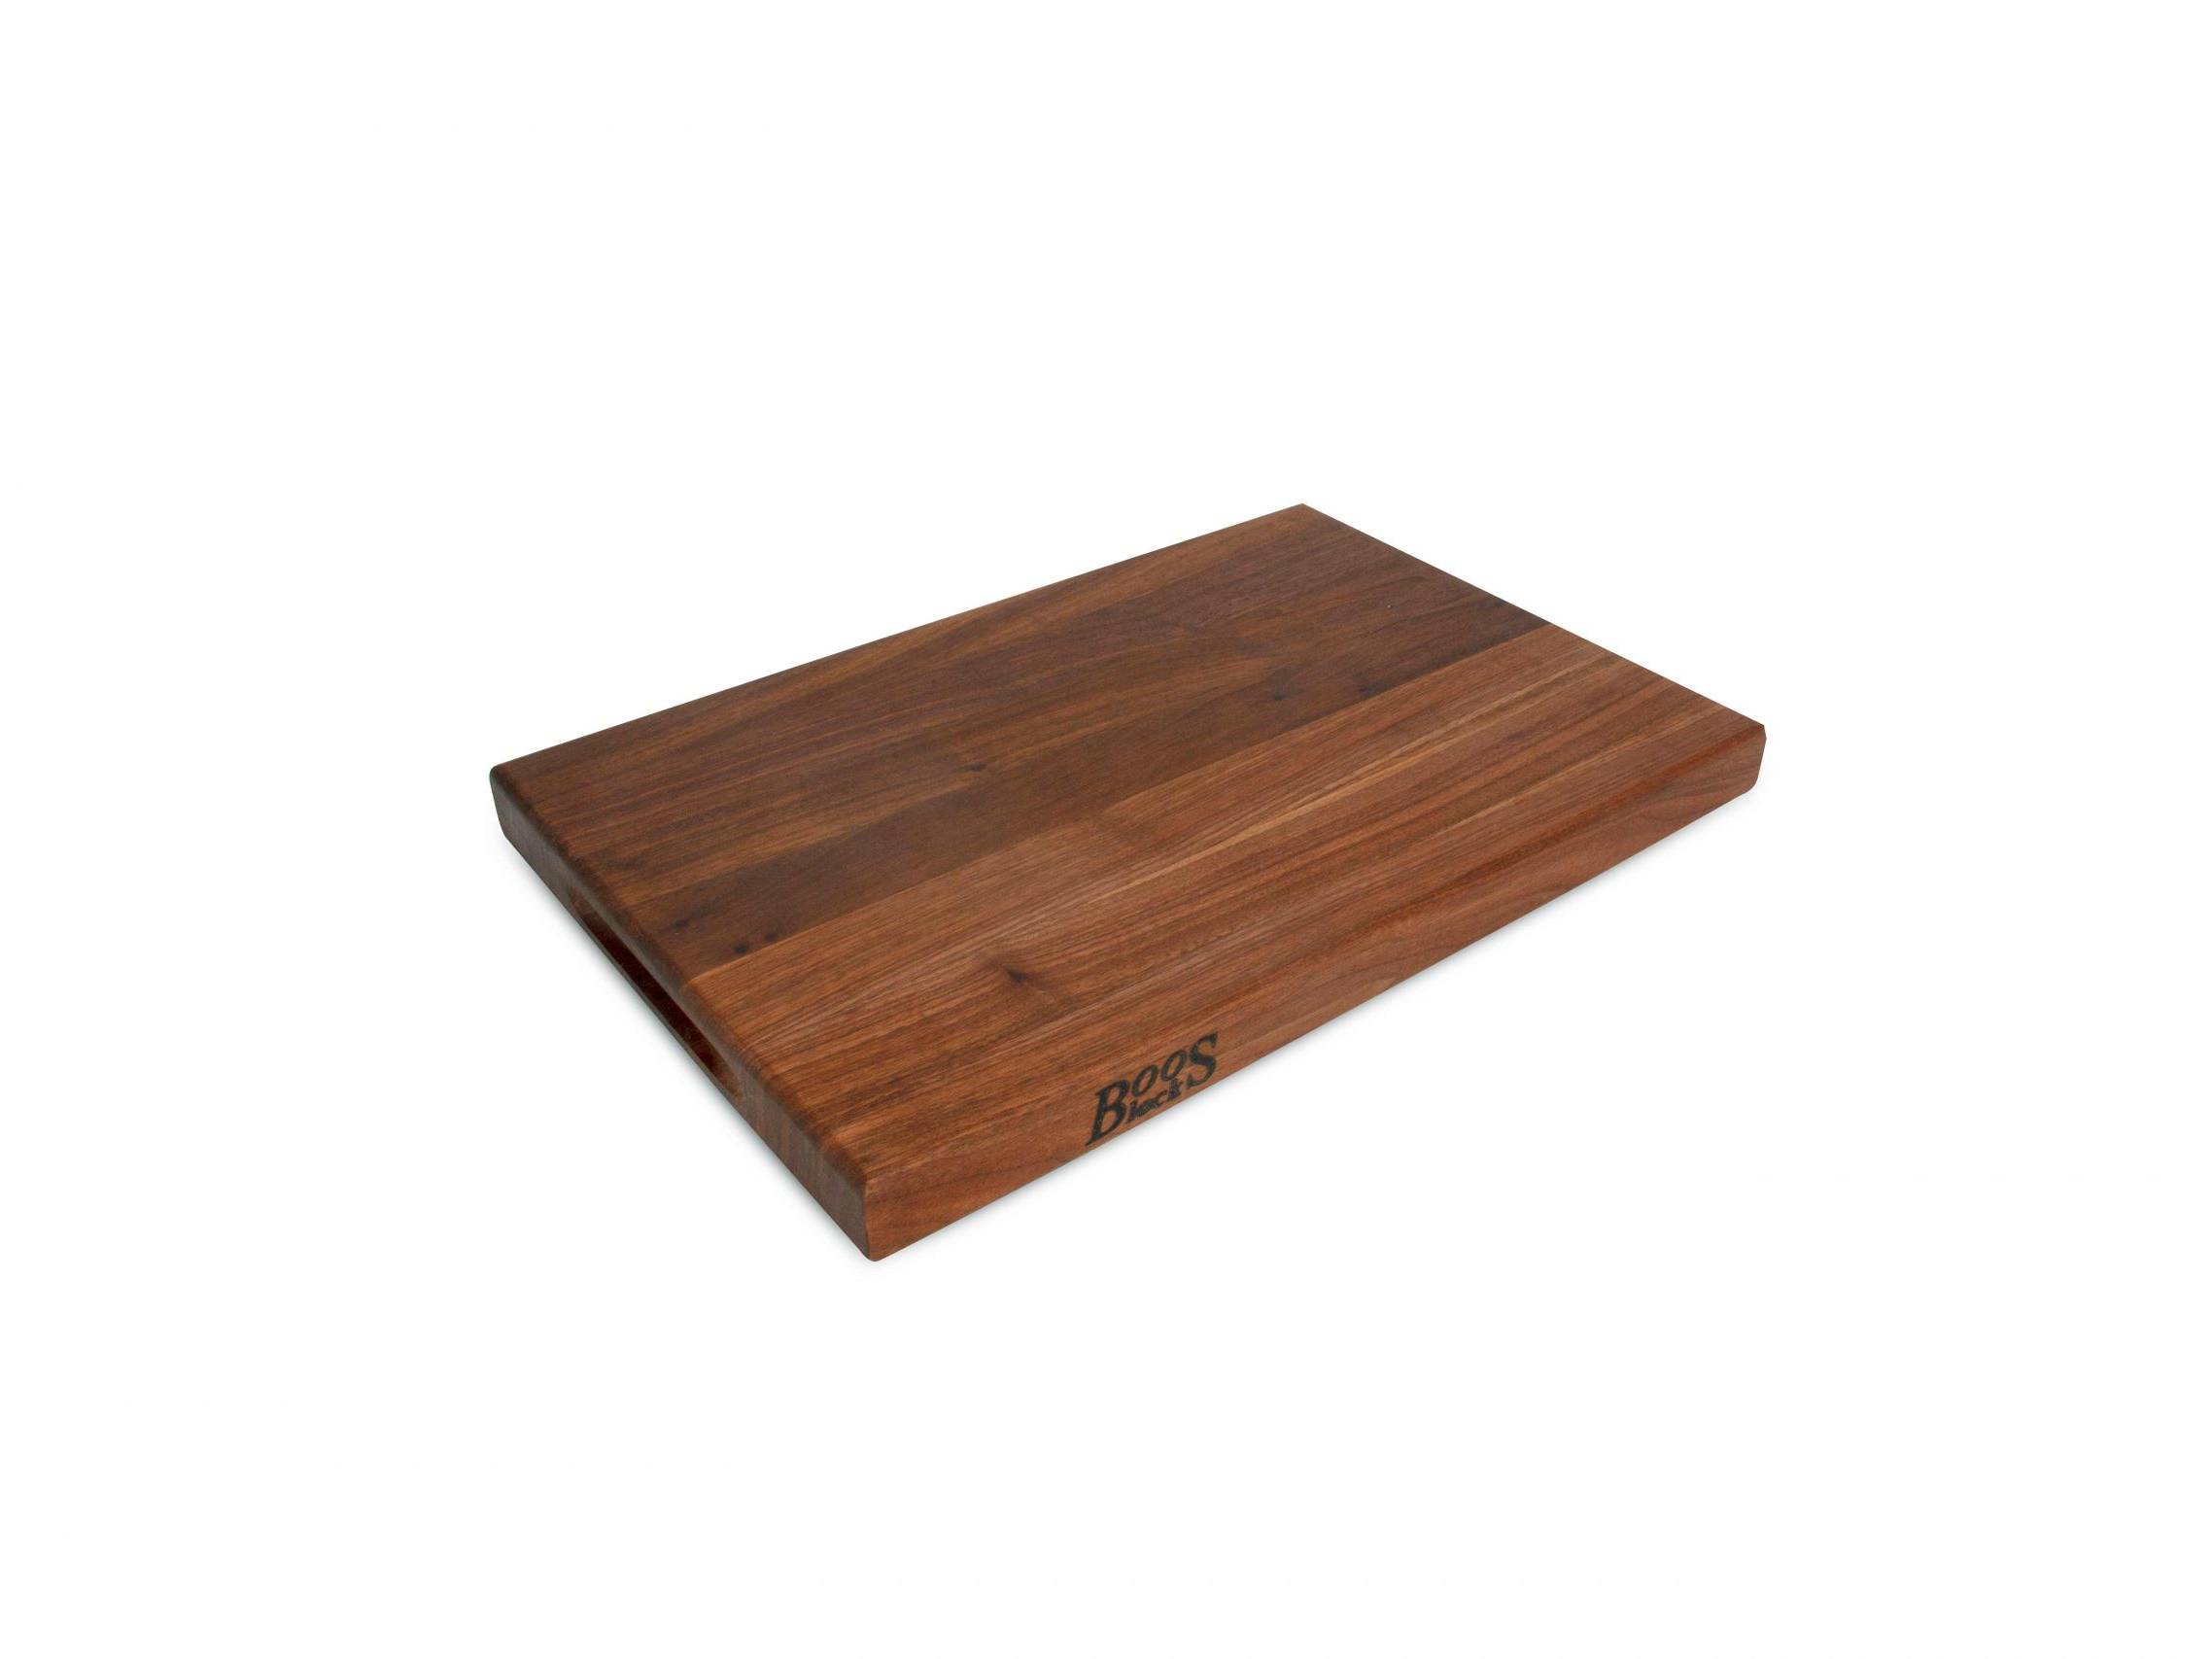 Pro Chef Black Walnut chopping board with recessed handles; can be used on both sides 11